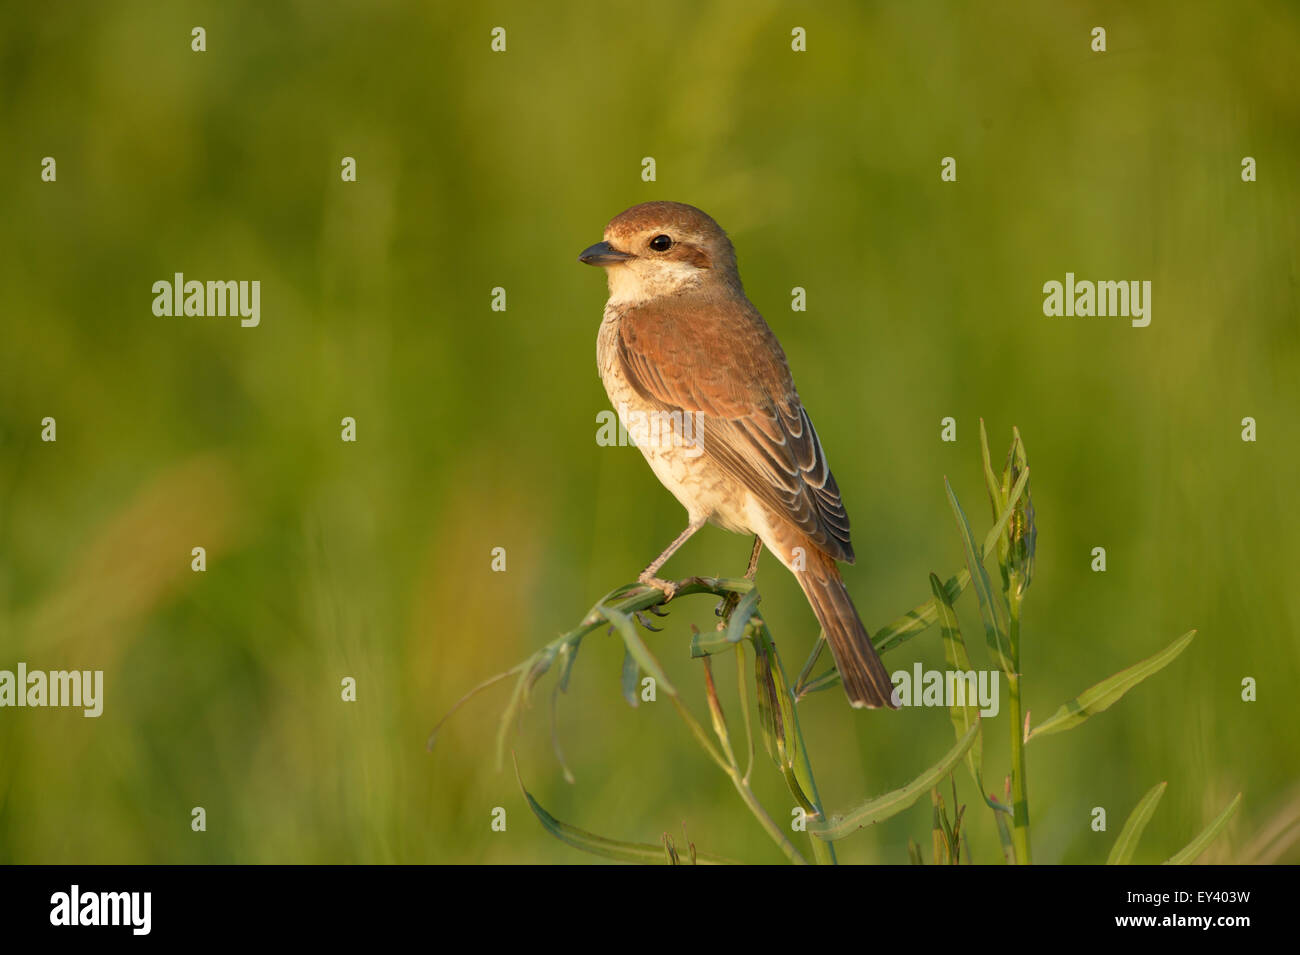 Red-backed Shrike (Lanius collurio) adult female perched on grassy stem, Romania, May Stock Photo